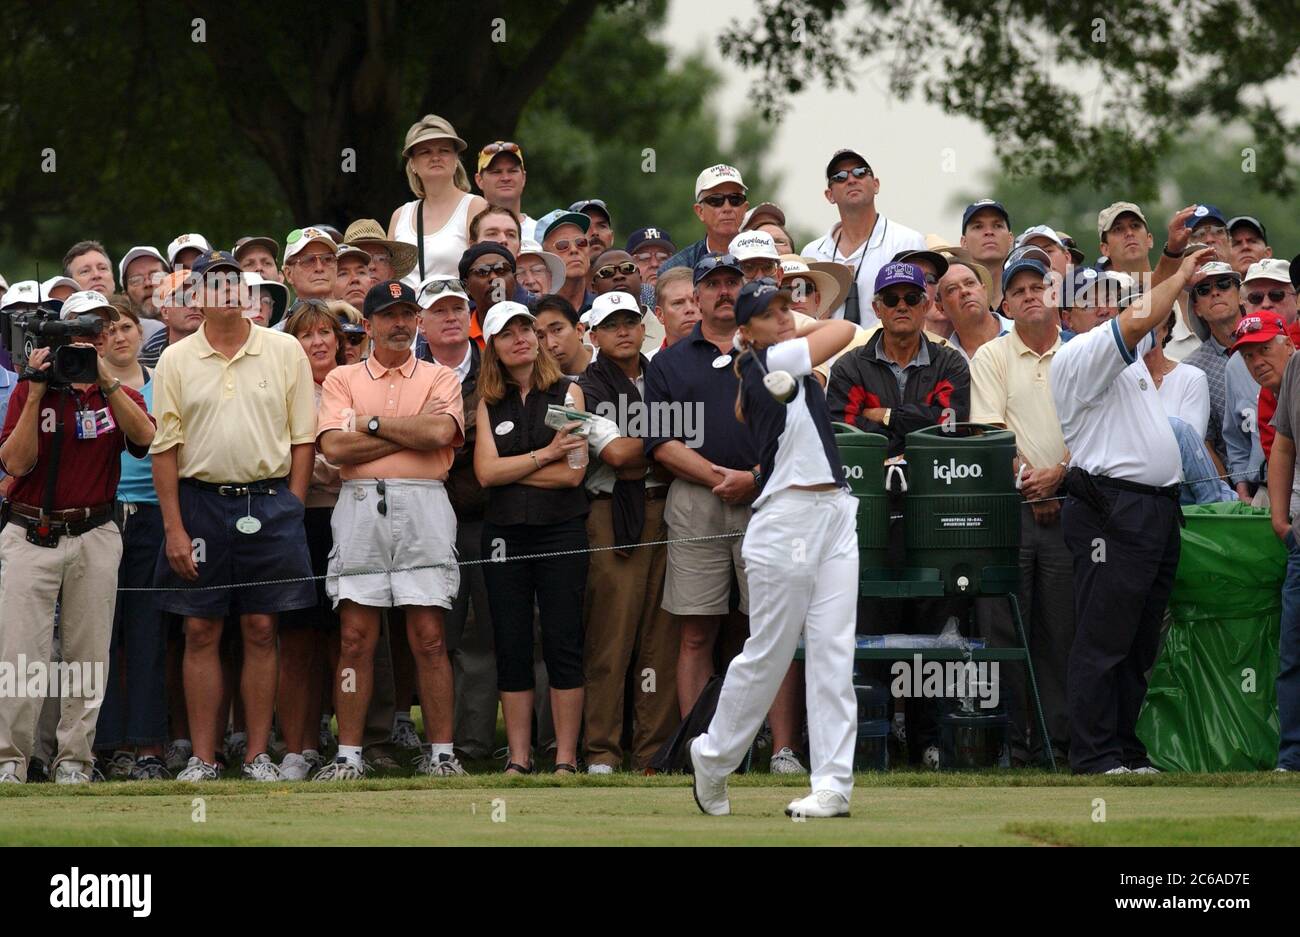 Fort Worth, Texas 22May03: Swedish golfer Annika Sorenstam plays in the 57th annual Colonial PGA tournament's historic first round Thursday as the first woman golfer in 50+ years to compete on the PGA tour. She finished the first round one over par. ©Bob Daemmrich Stock Photo